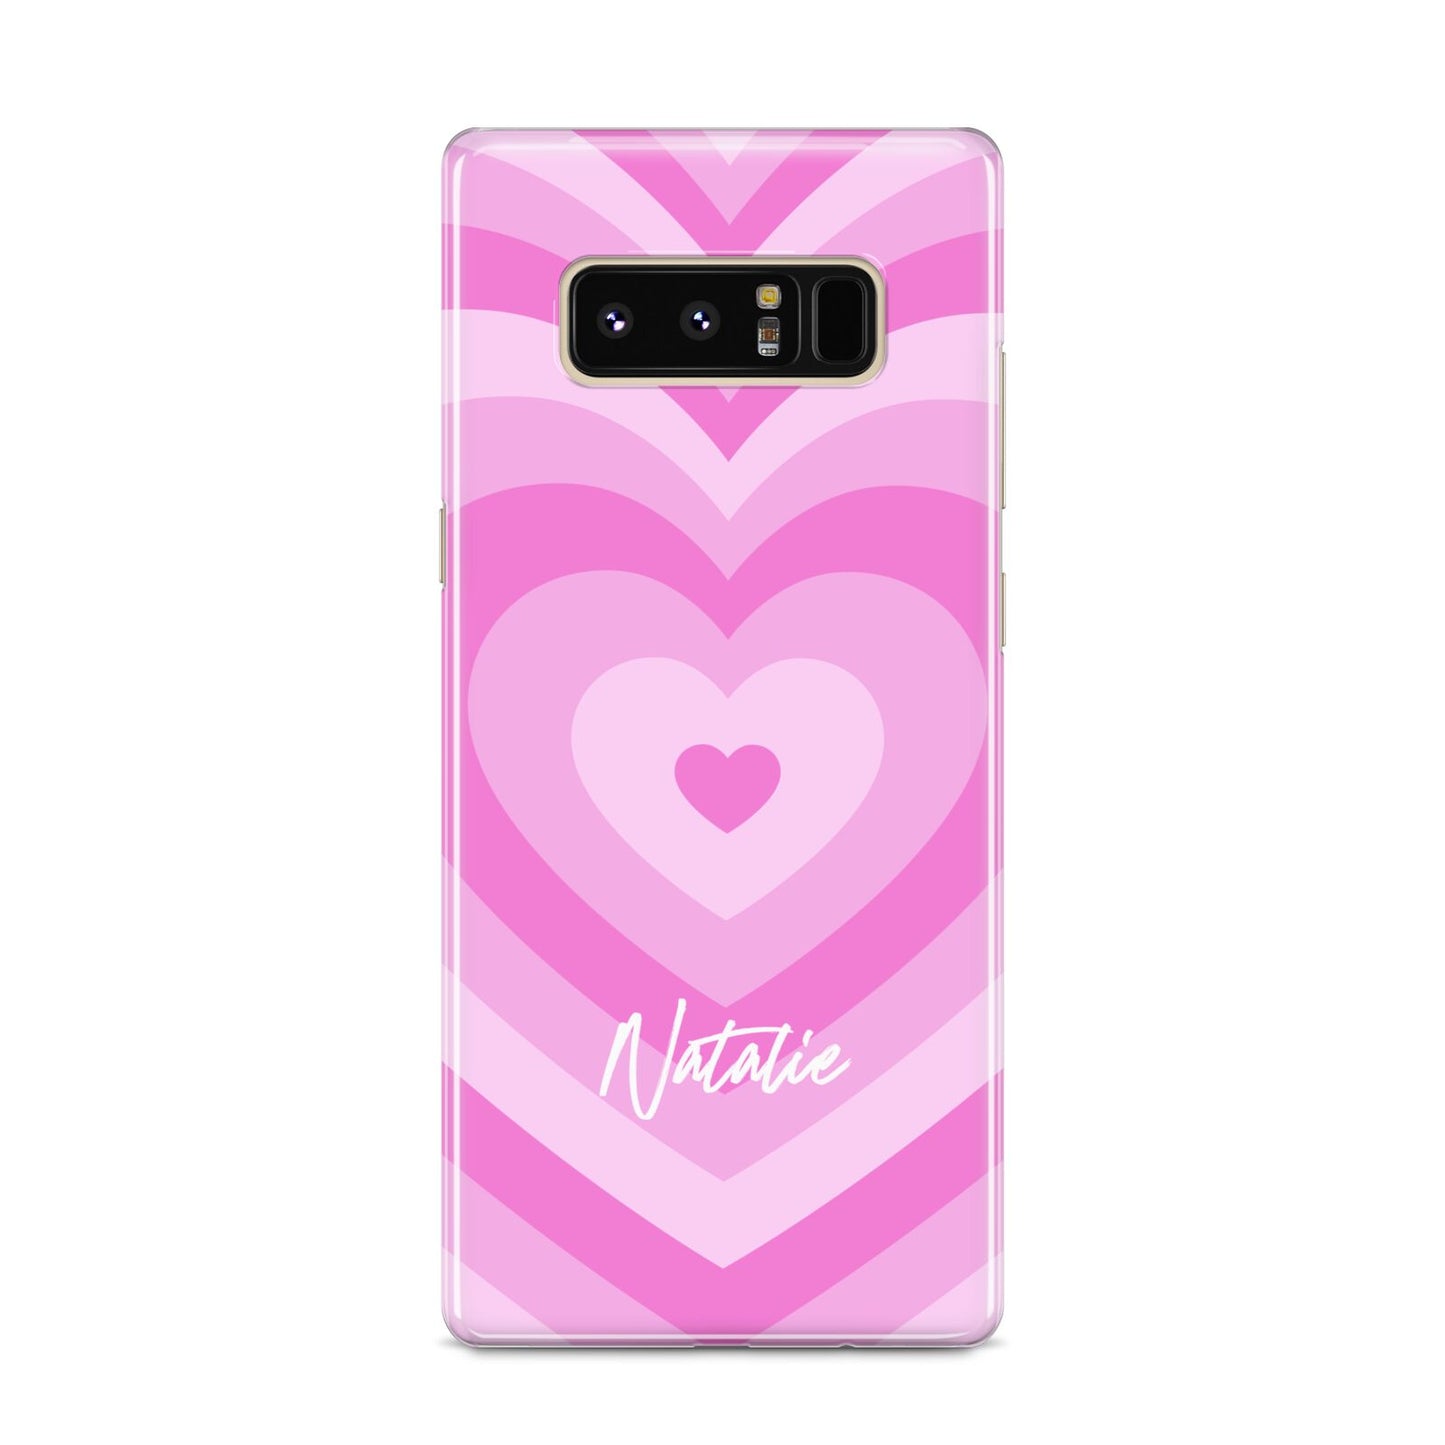 Personalised Pink Heart Samsung Galaxy S8 Case